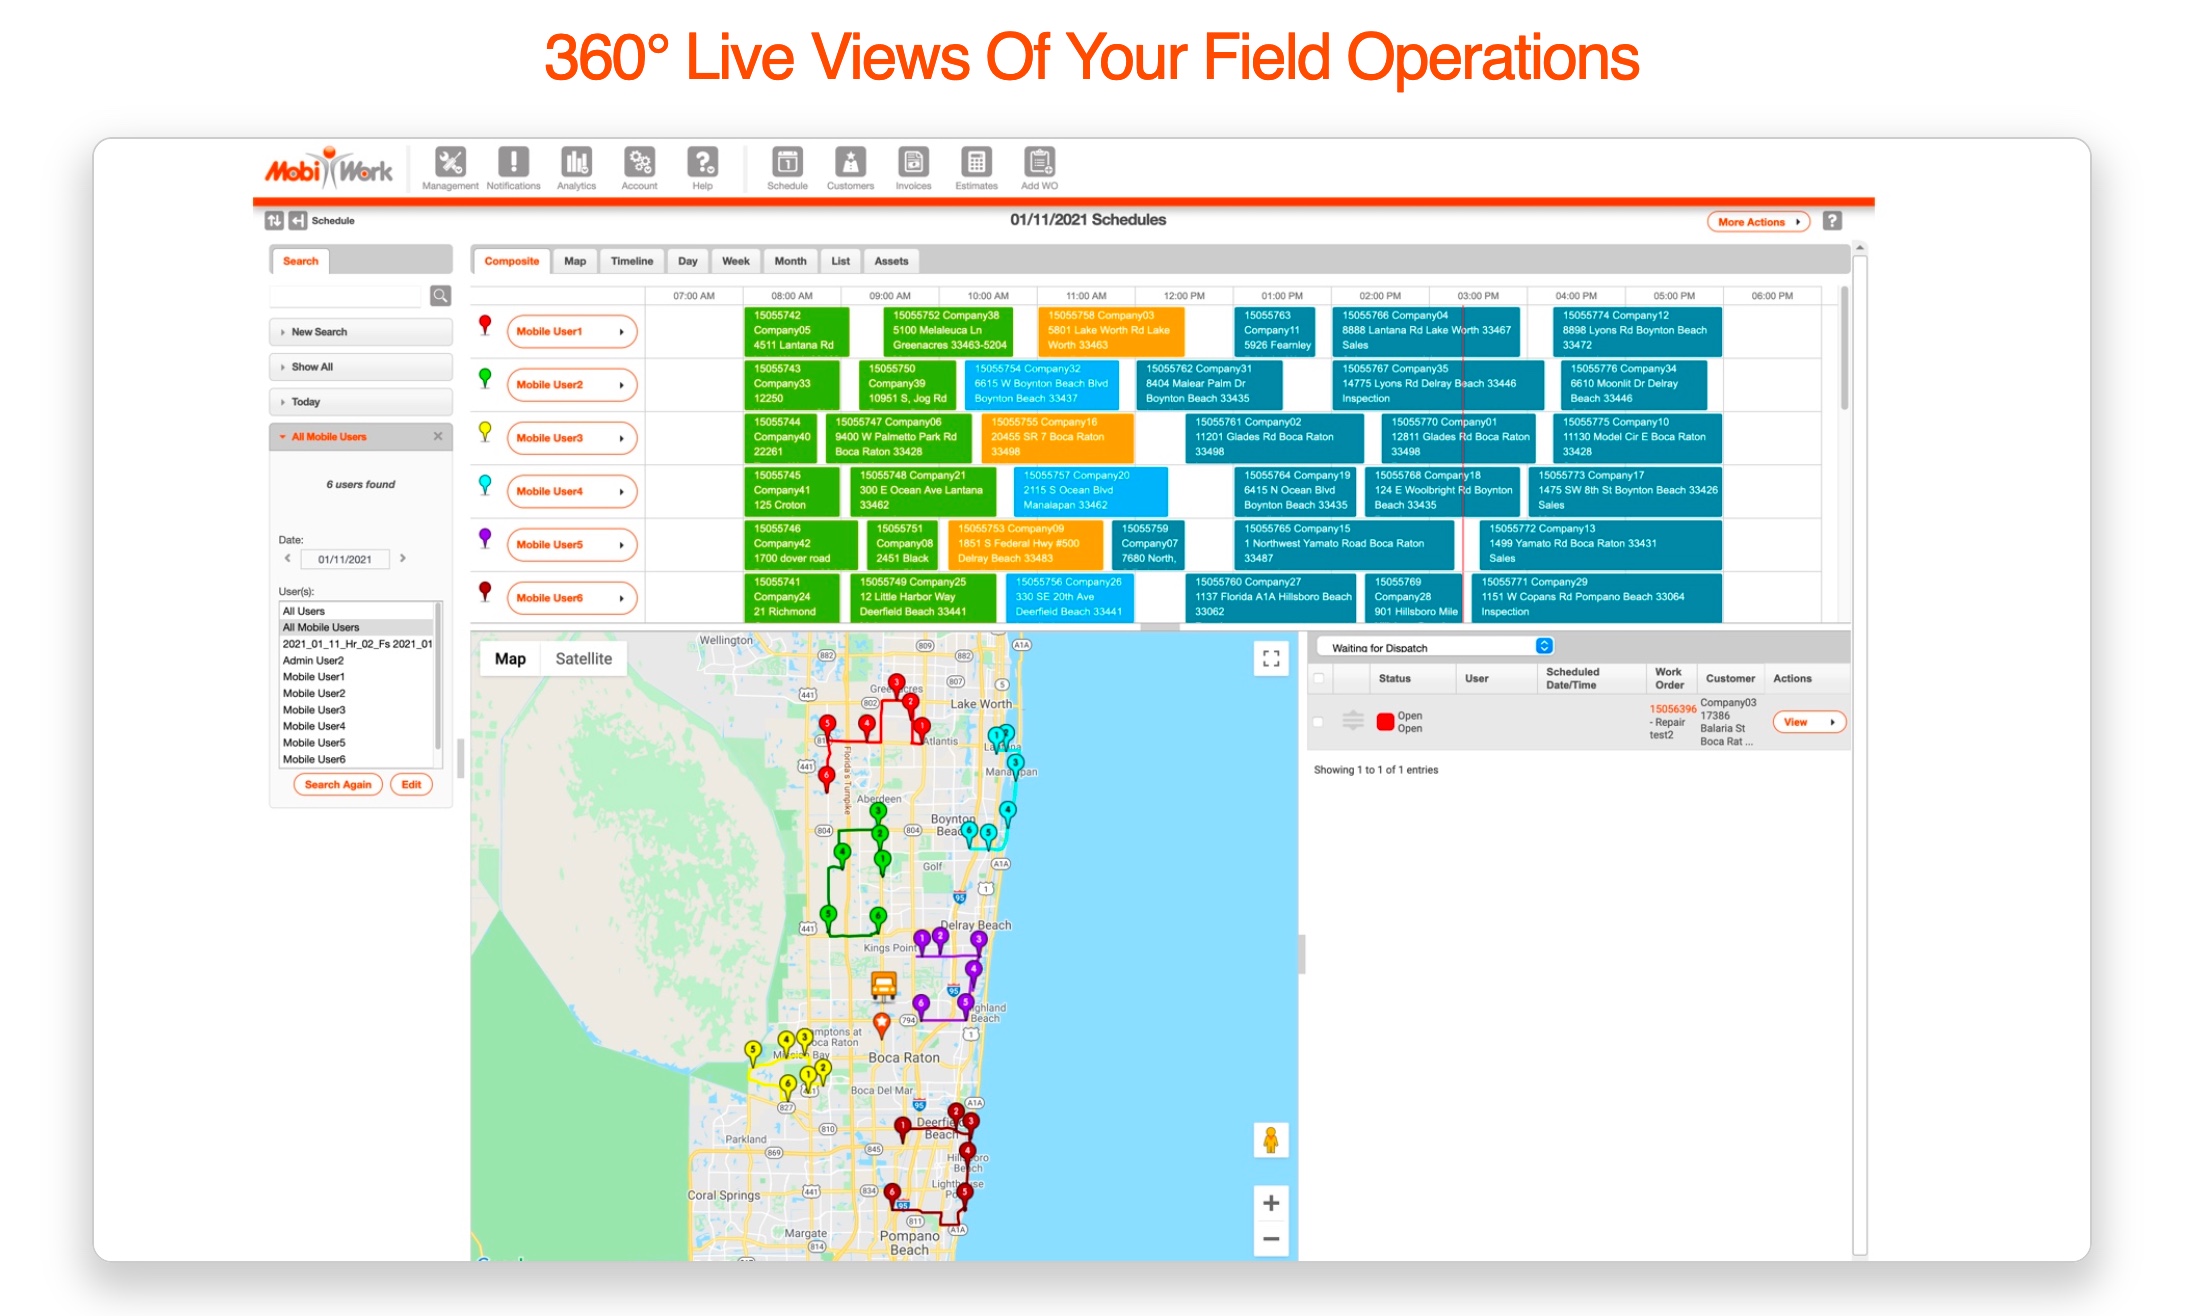 <p style="text-align: center;"><span style="font-weight: 400;">Live field operations view in </span><a href="https://www.capterra.com/p/230787/MobiWork/"><span style="font-weight: 400;">MobiWork</span></a></p>
